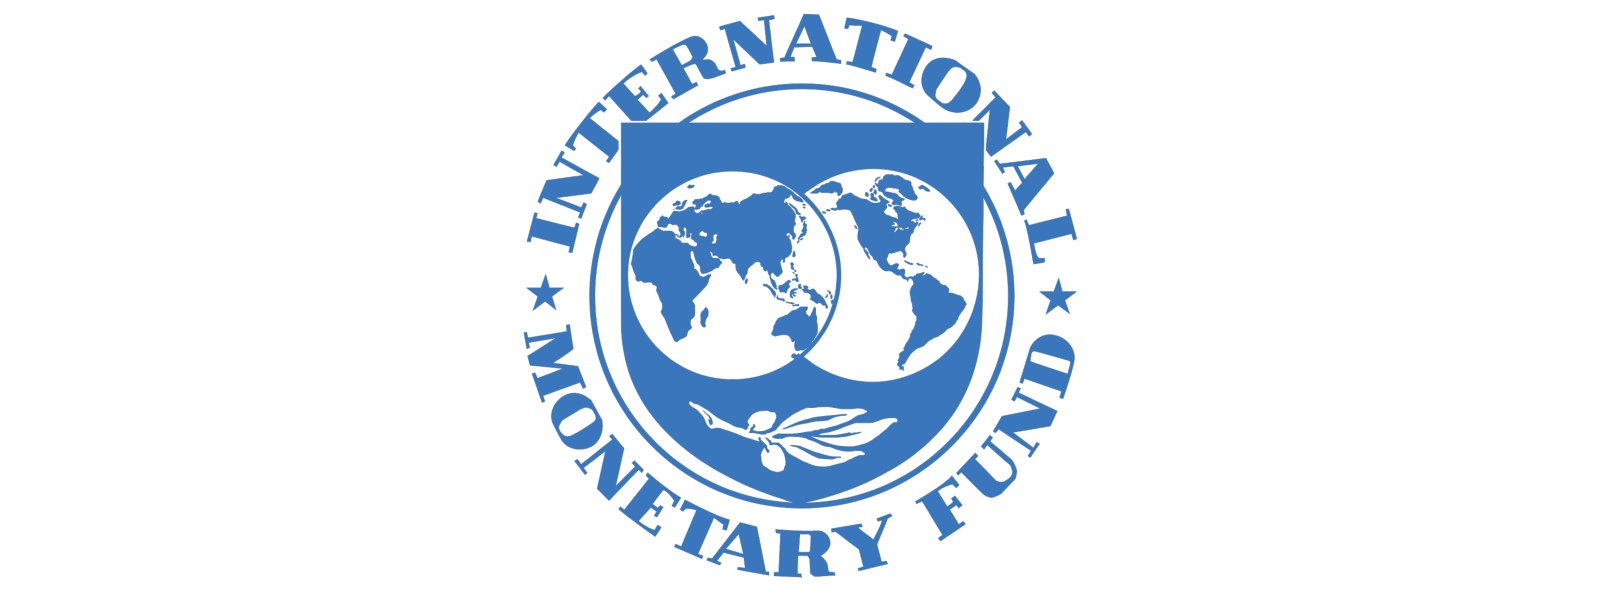 IMF hopes to complete Sri Lanka aid talks ‘as quickly as possible’